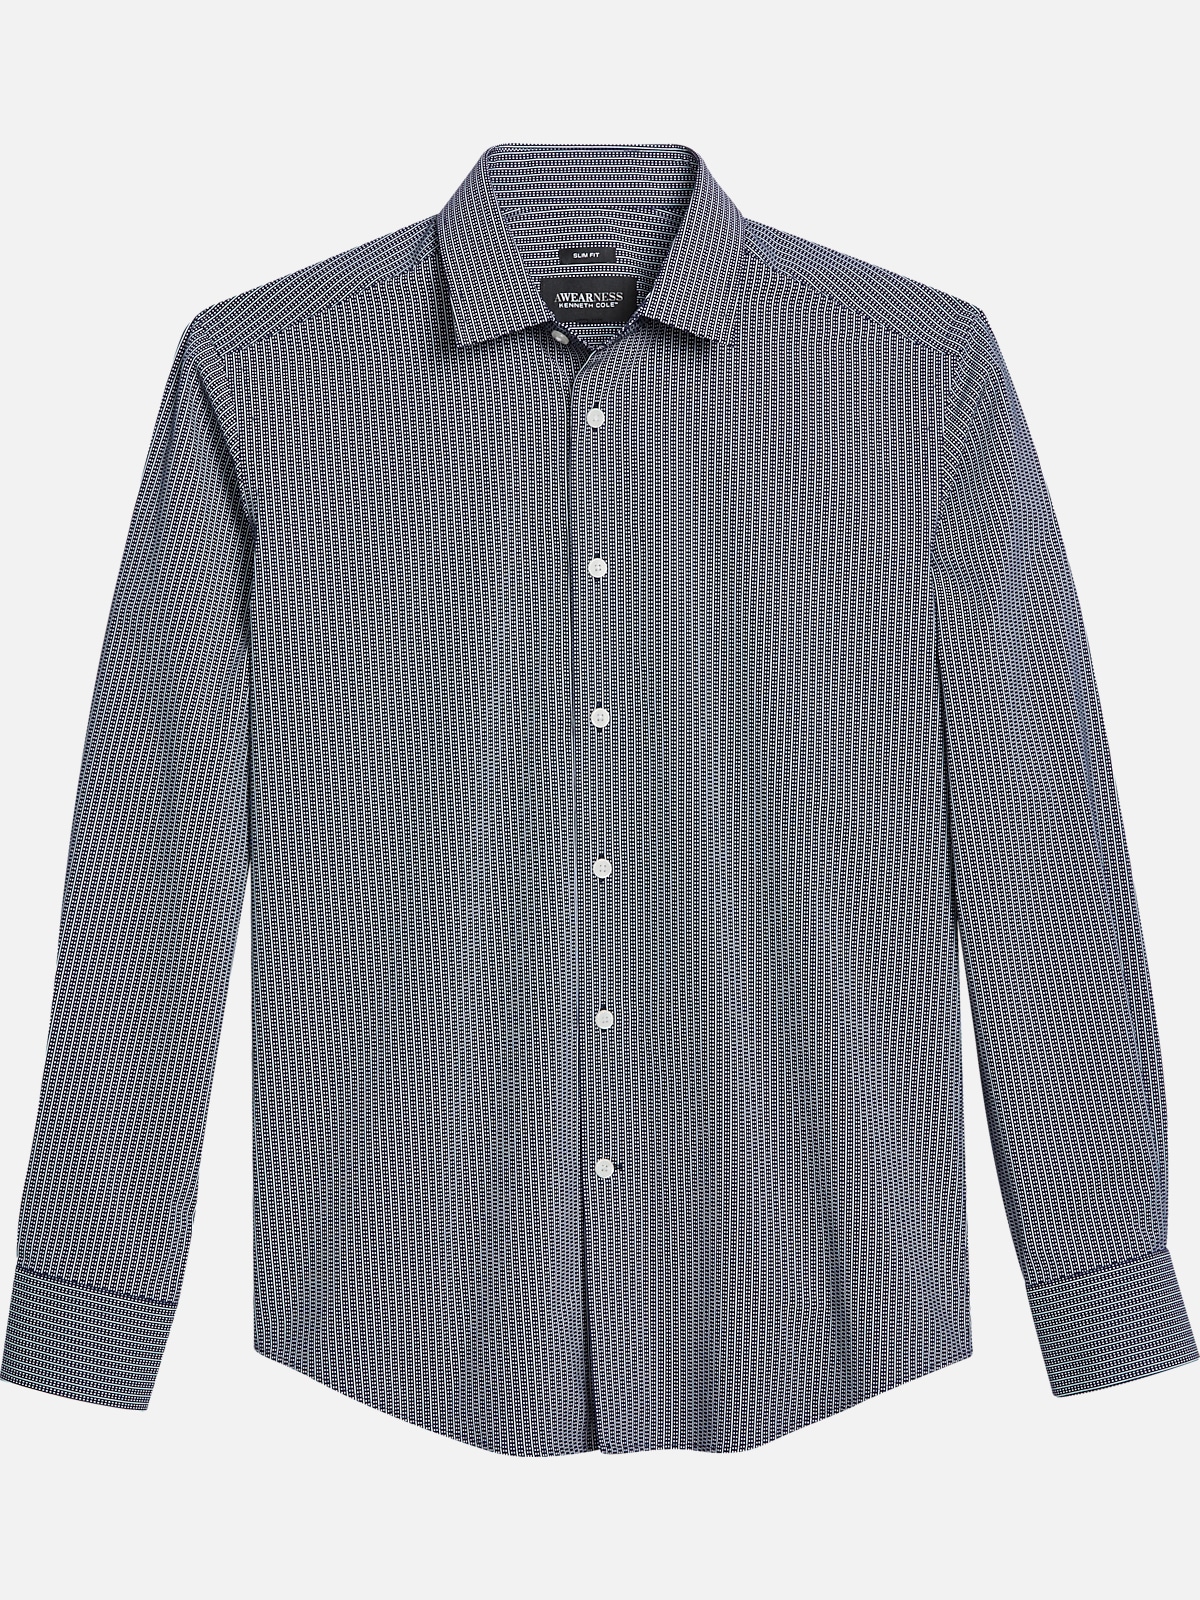 Awearness Kenneth Cole Slim Fit Spread Collar Sport Shirt | New ...